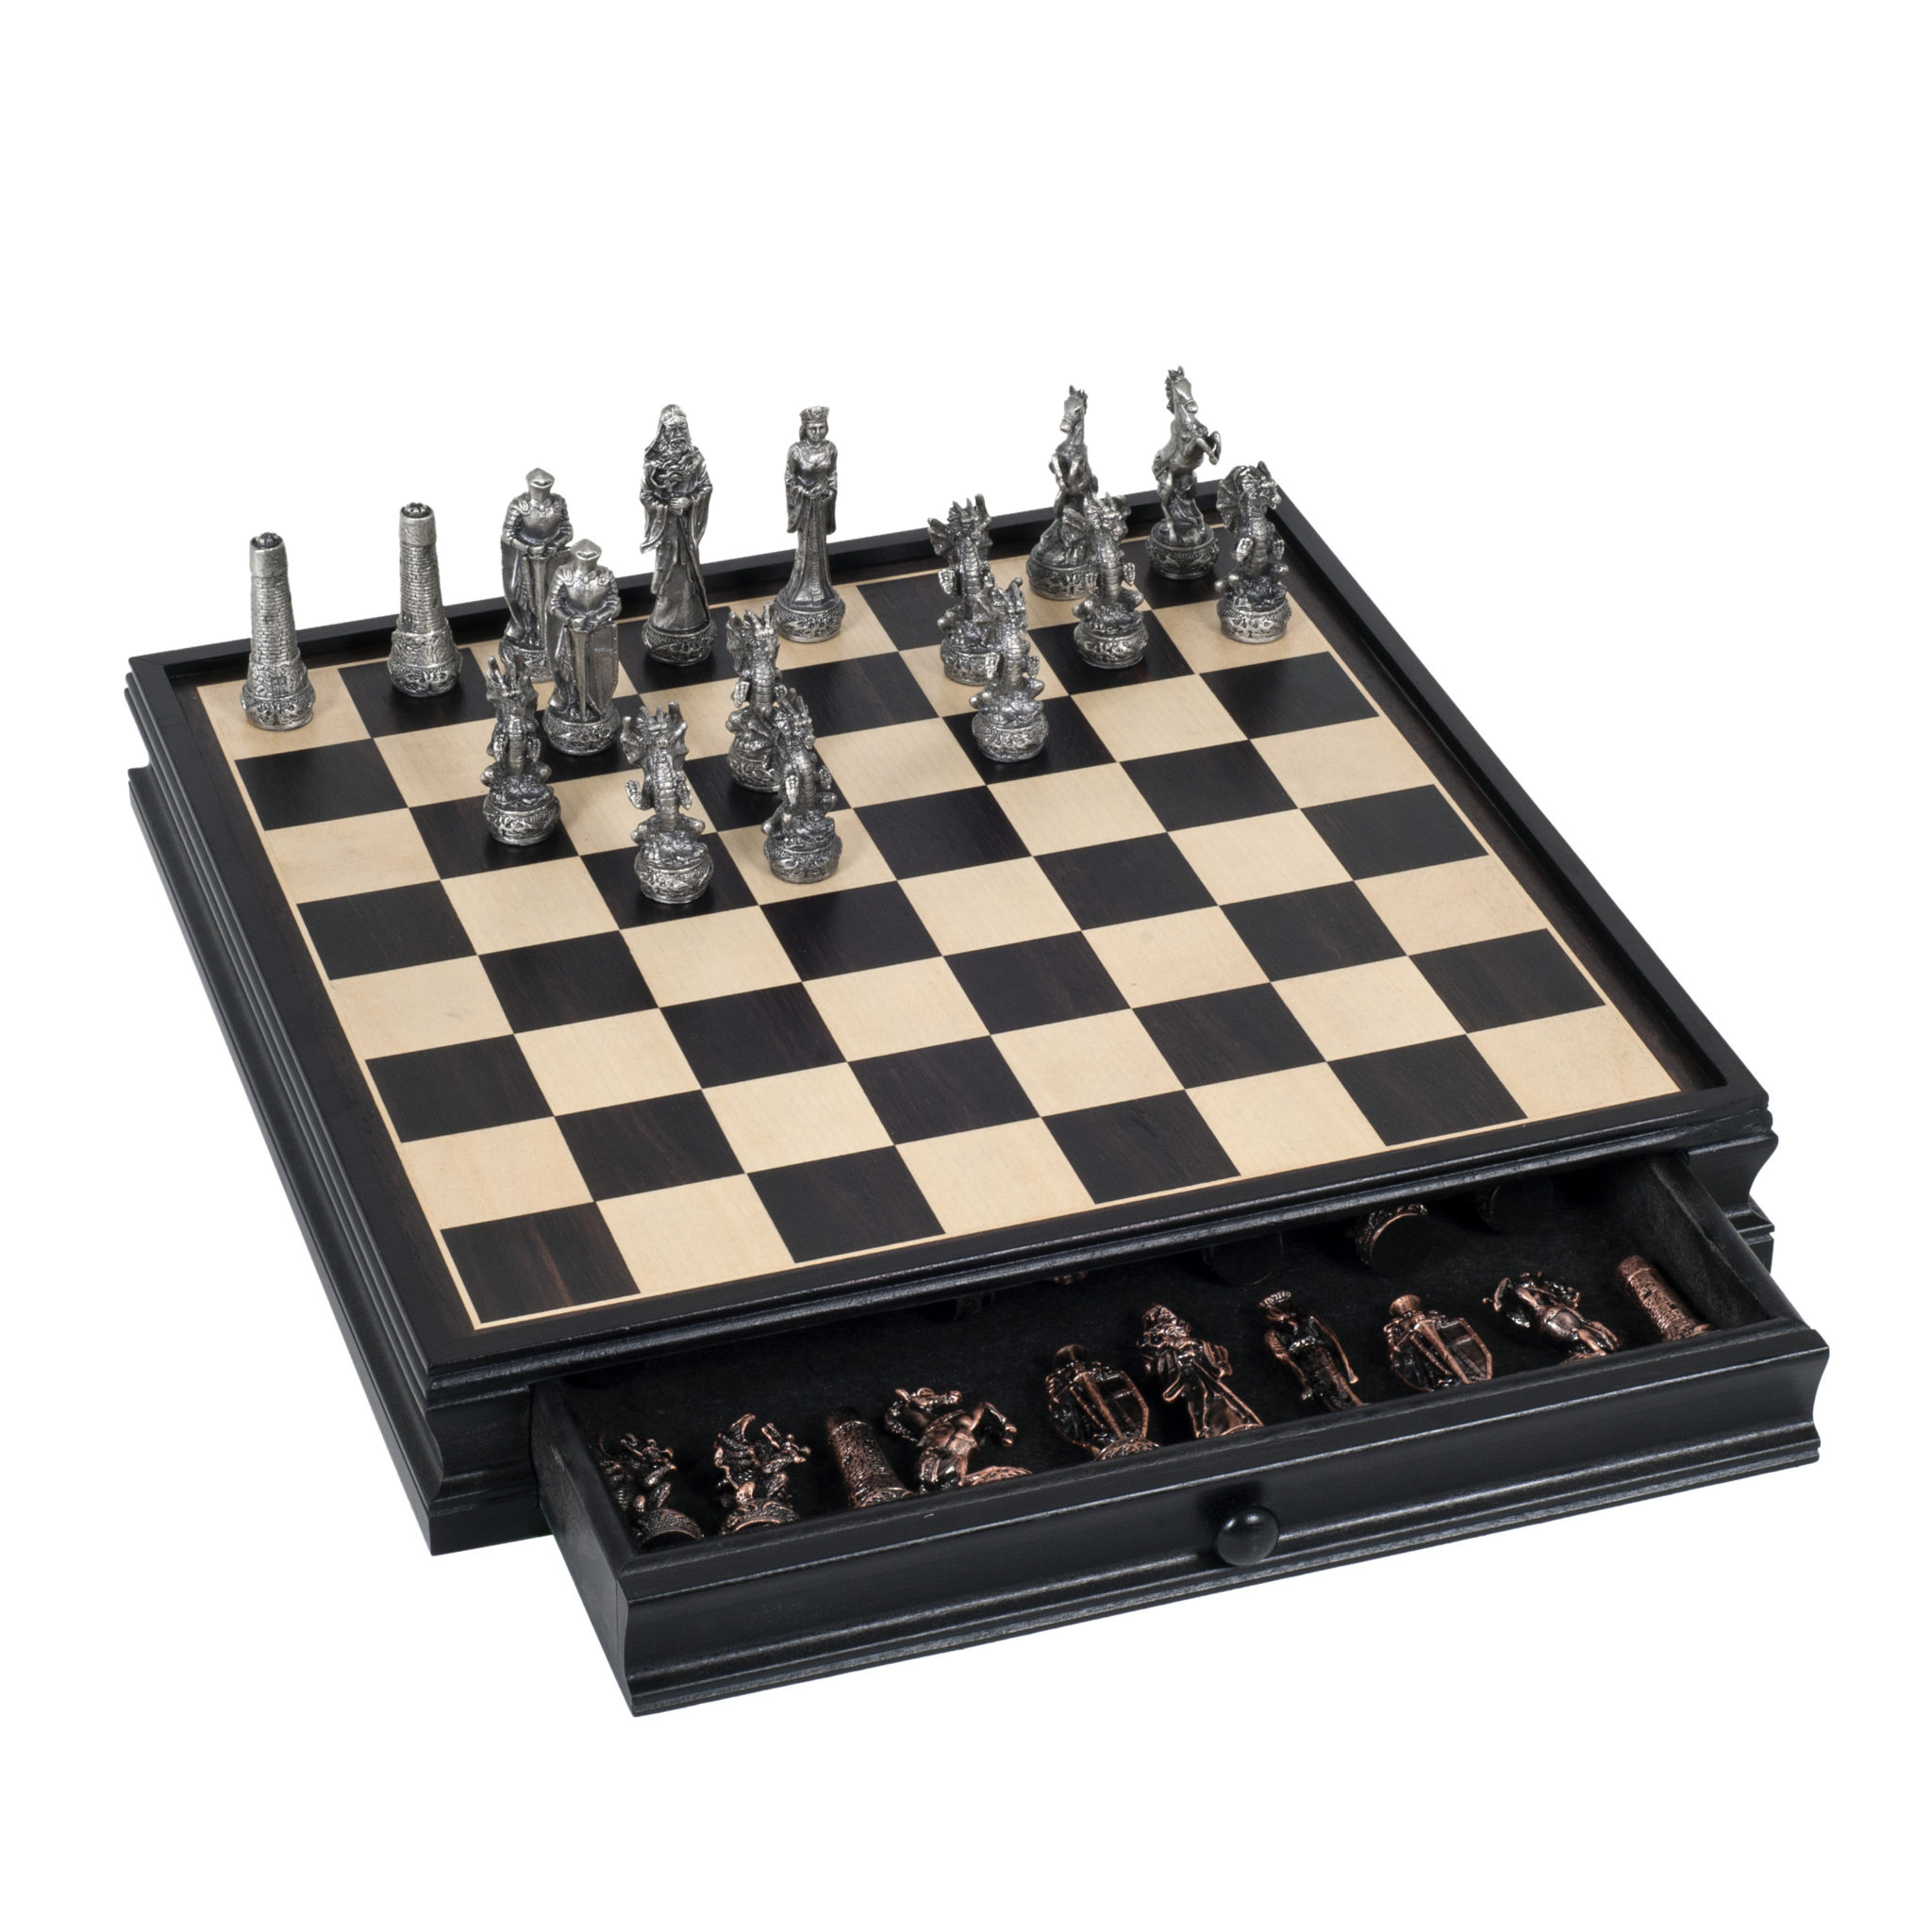 4 Player Vinyl Chess Board - 1.56 Squares